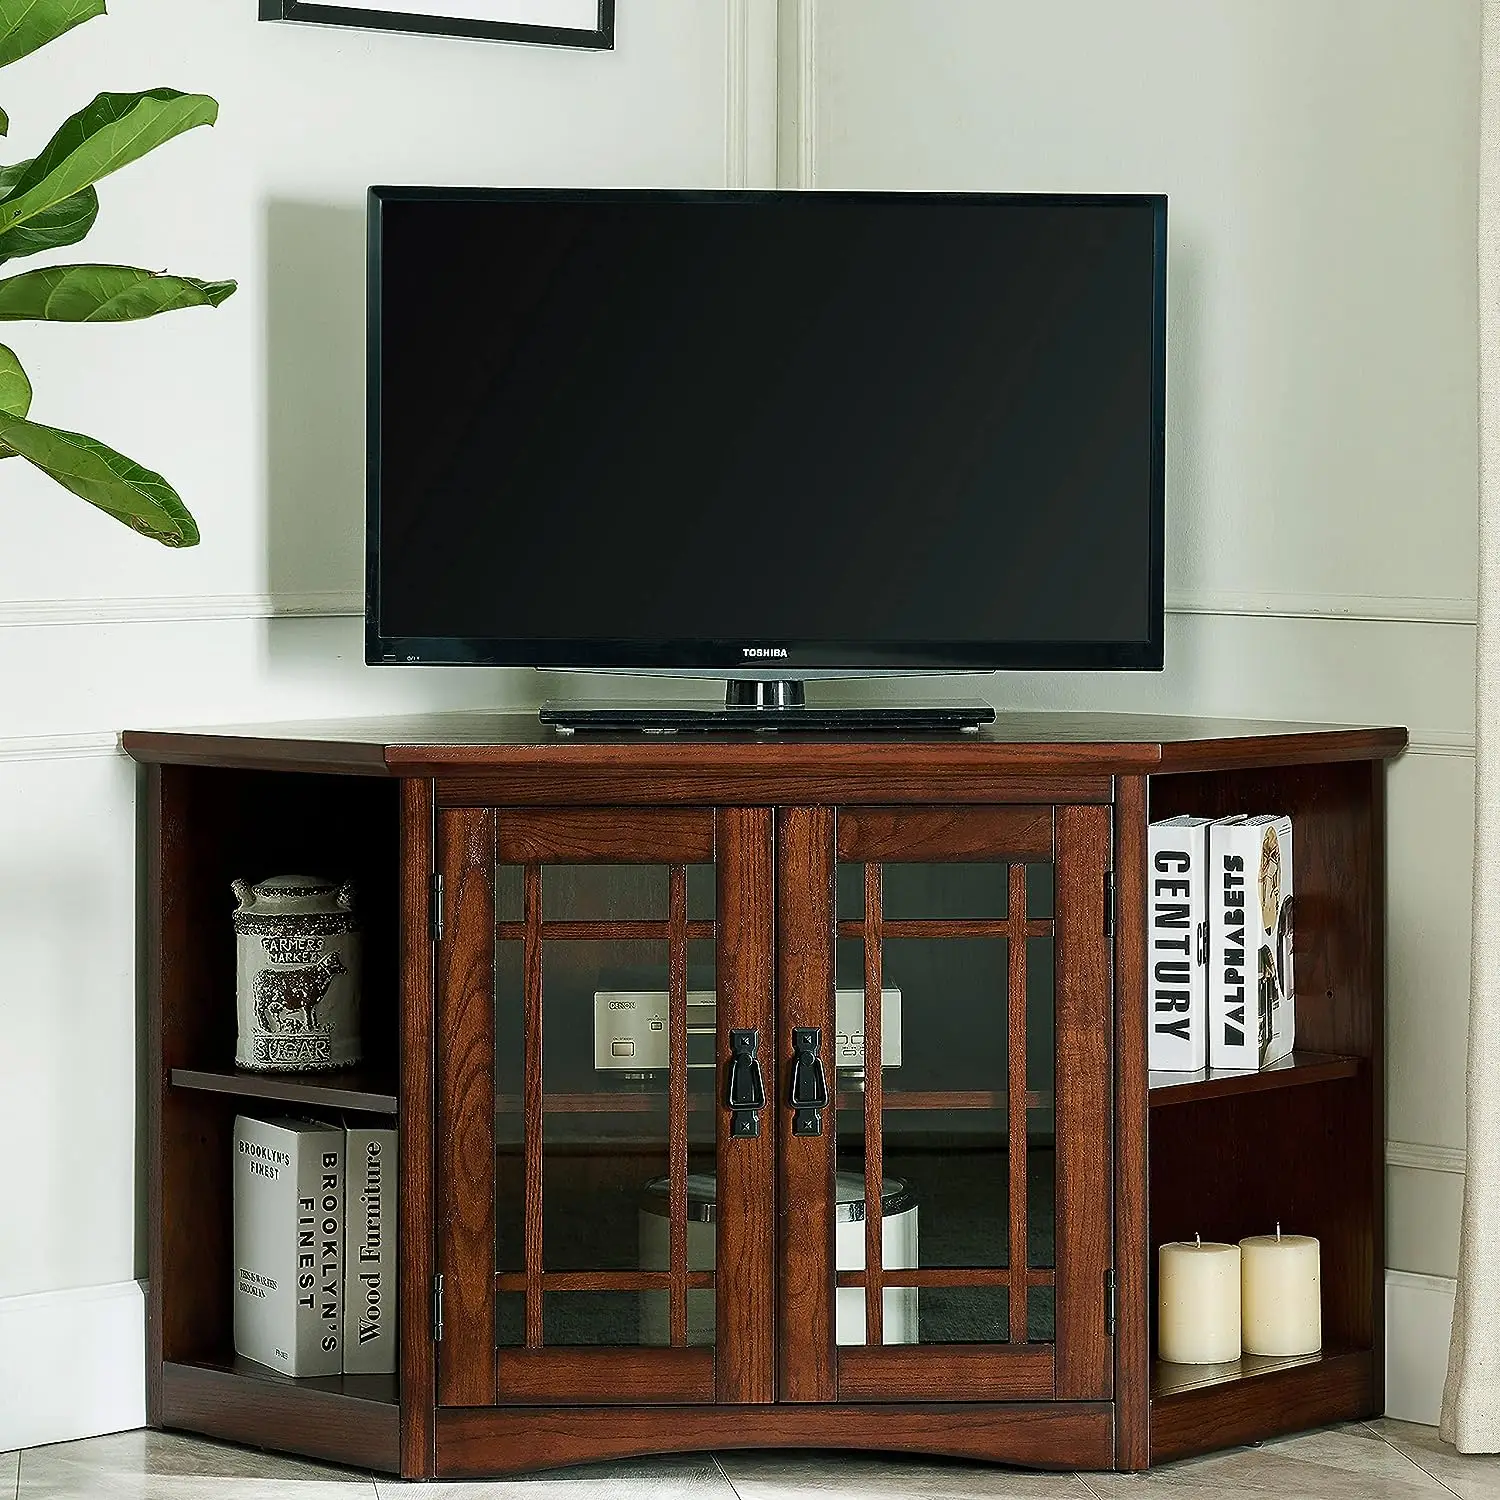 

Corner Stand with Bookcase Ends TV's, 50-inch, Mission Oak